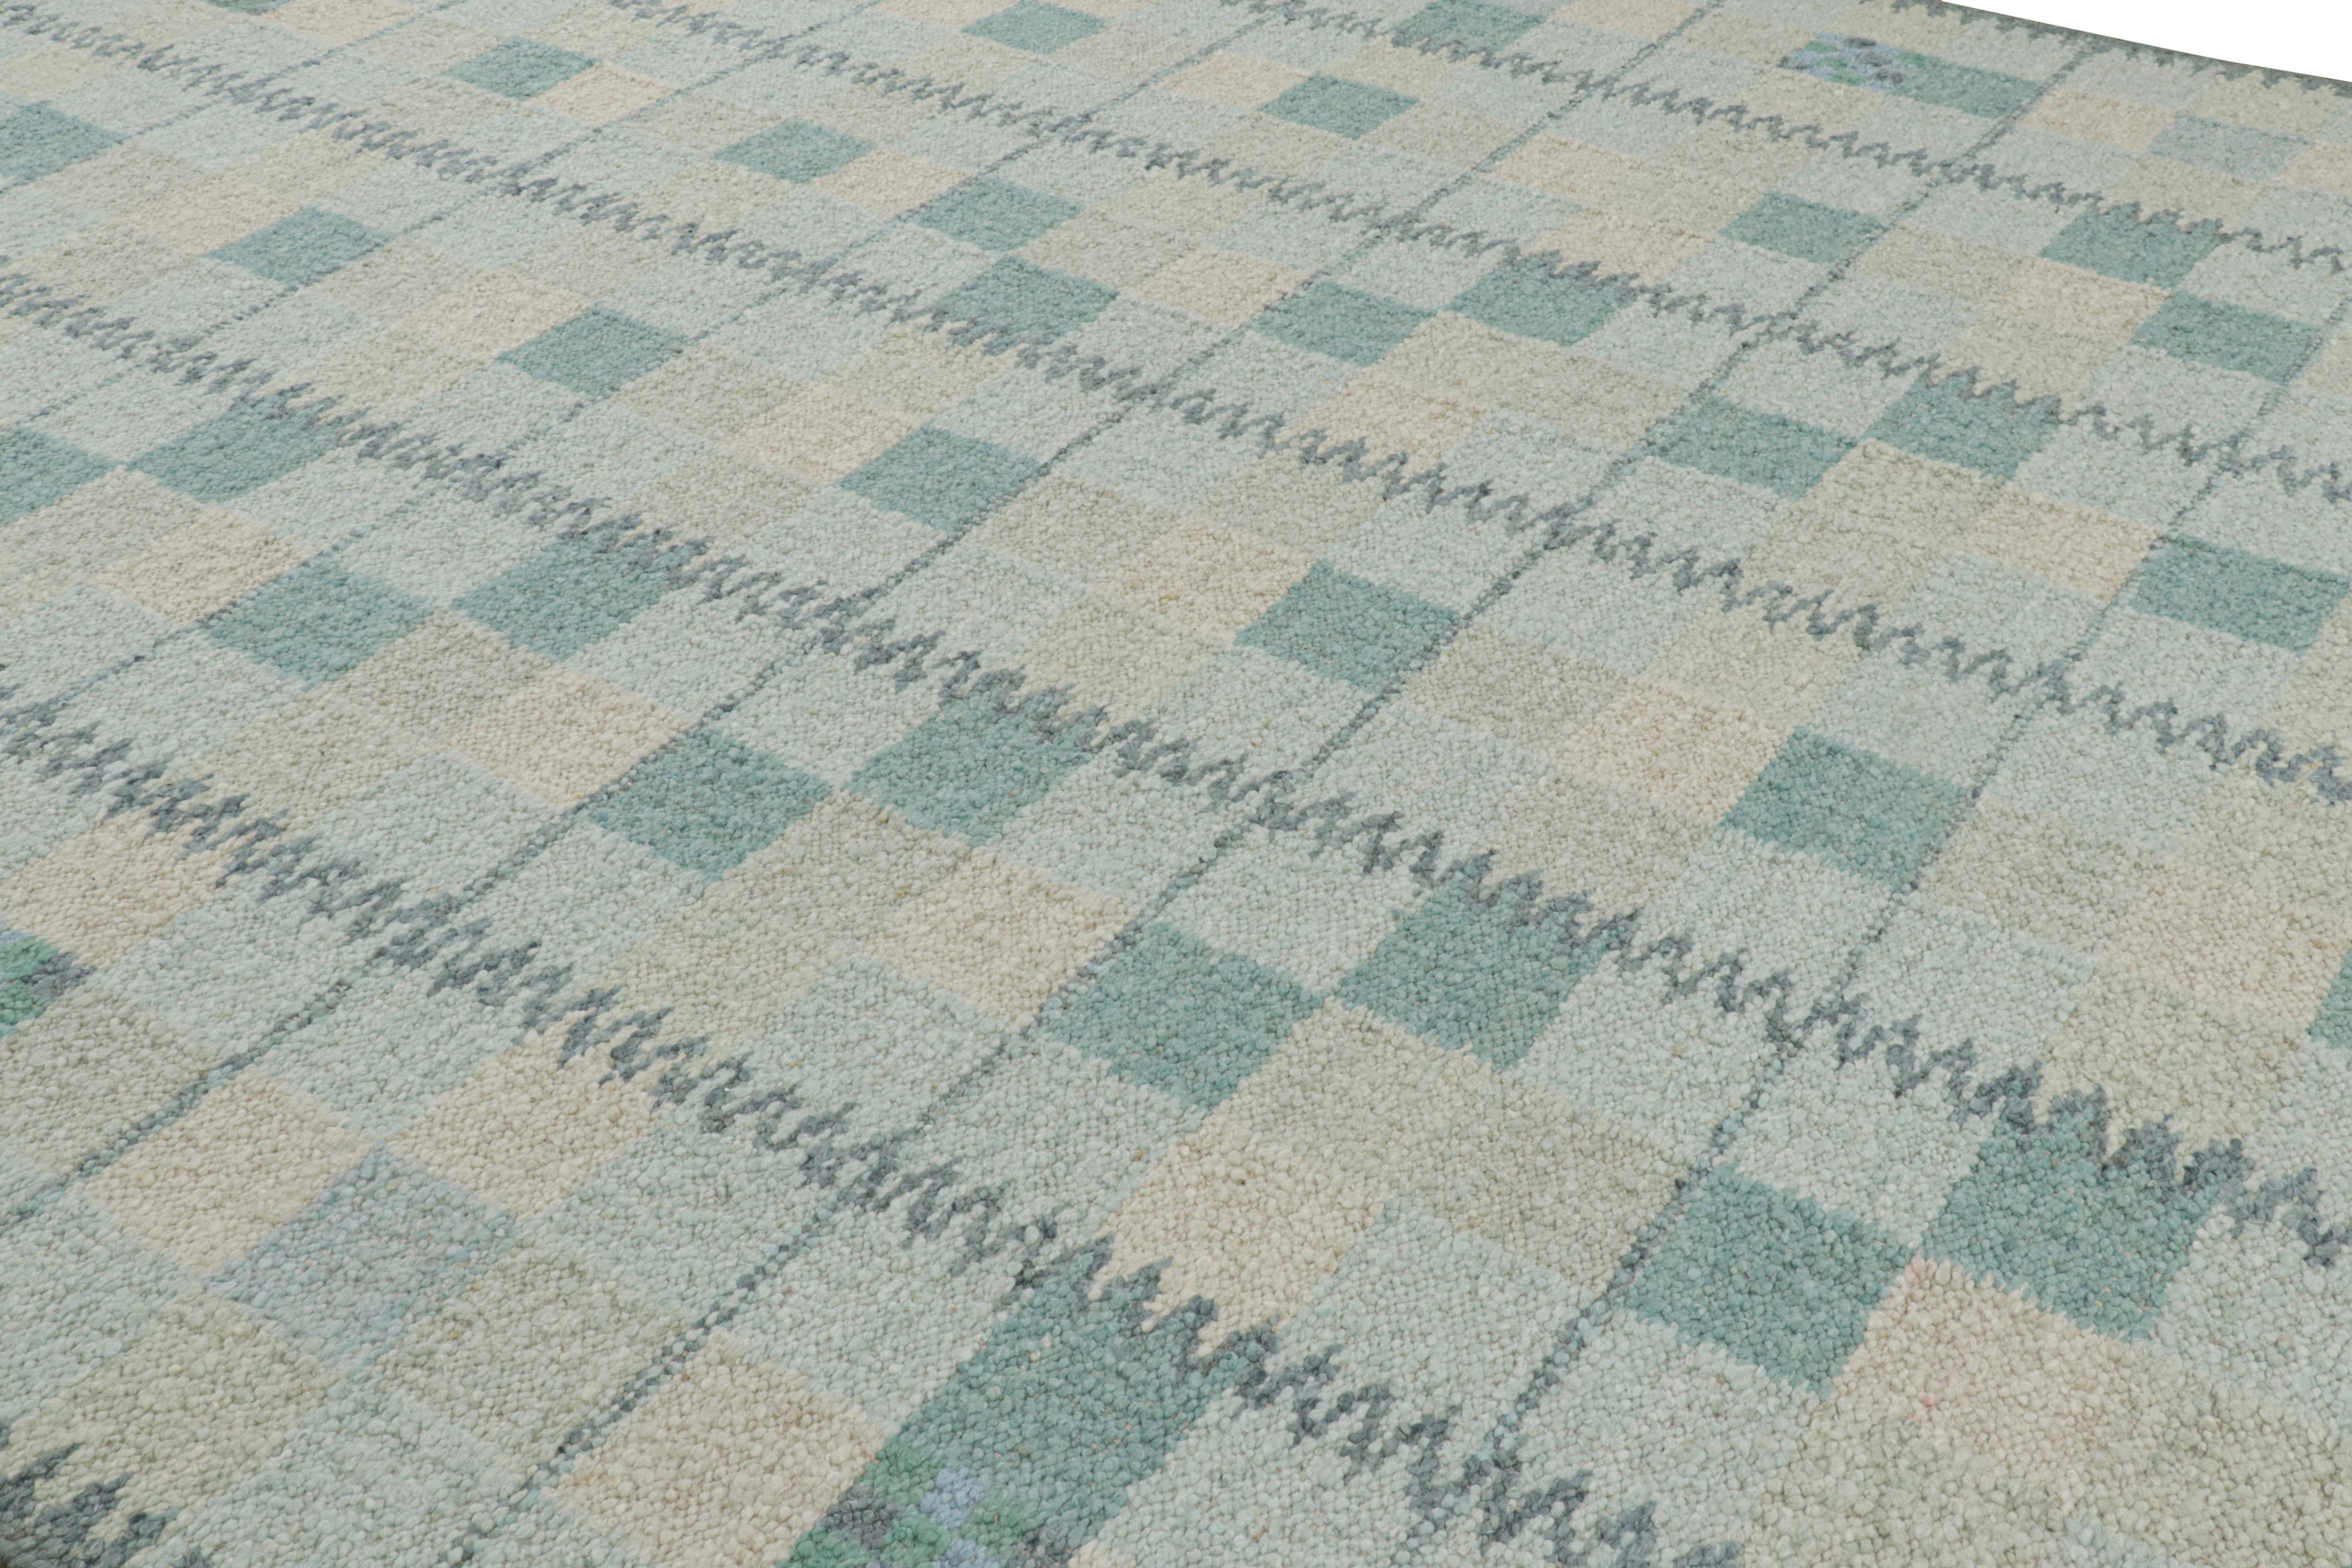 This 10x14 Swedish-style rug, handwoven in a wool flatweave, is from the inventive “Nu” texture in Rug & Kilim’s award-winning Scandinavian flat weave collection. 

On the Design: 

“Nu” enjoys a boucle-like texture of blended yarns, and a look both